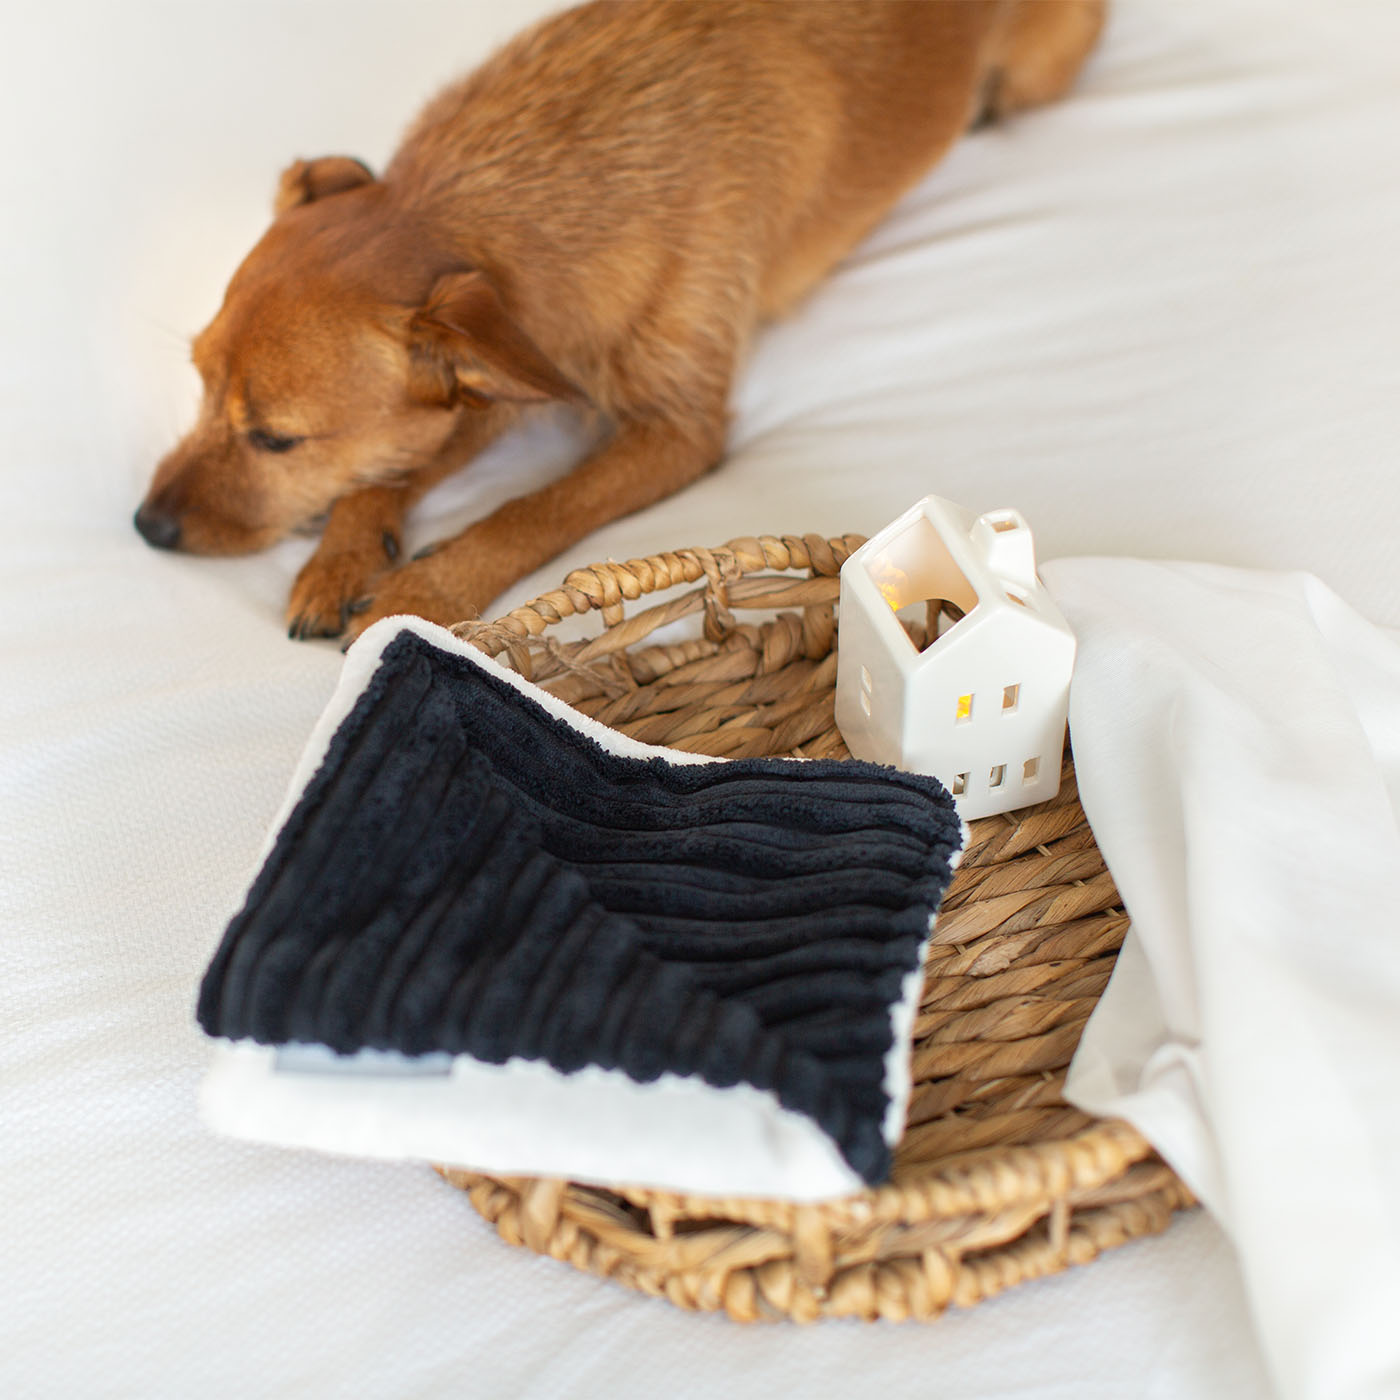 Discover our Puppy Scent Blanket in Navy Essentials Plush. Perfect to help settle in a new puppy. Give to puppy whilst they are with mum to bring the scent of mum with them, this is great to help relax your puppy Smooths the ‘moving home’ process. Made from plush ribbed fabric and super soft sherpa/faux fur. now available at Lords and Labradors